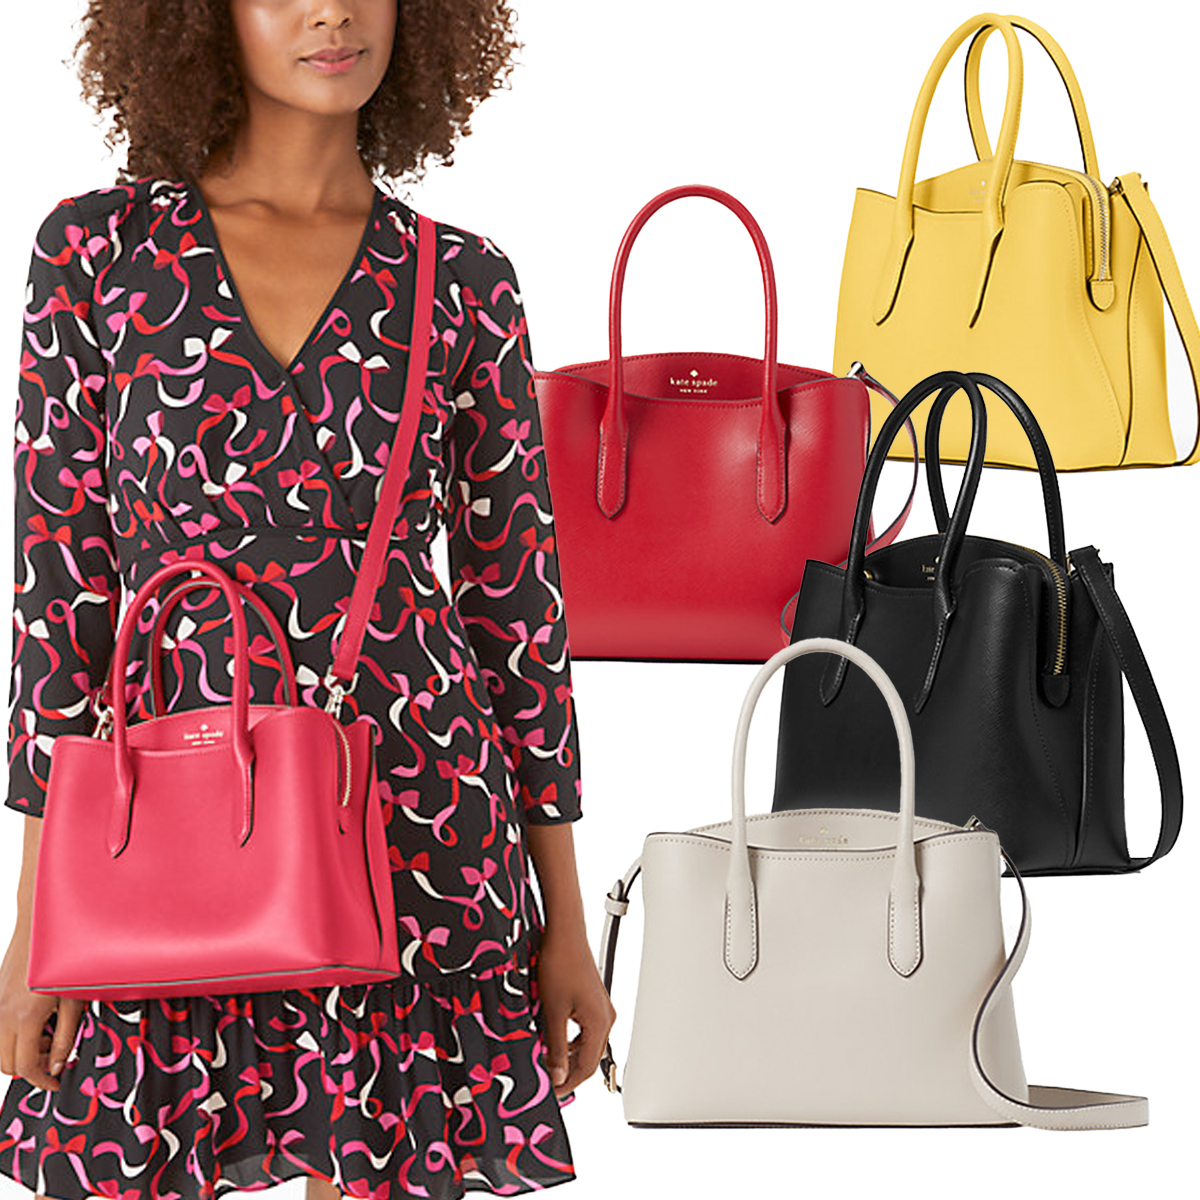 Kate Spade Surprise Deal: This $400 Bag Is on Sale for Less Than $139